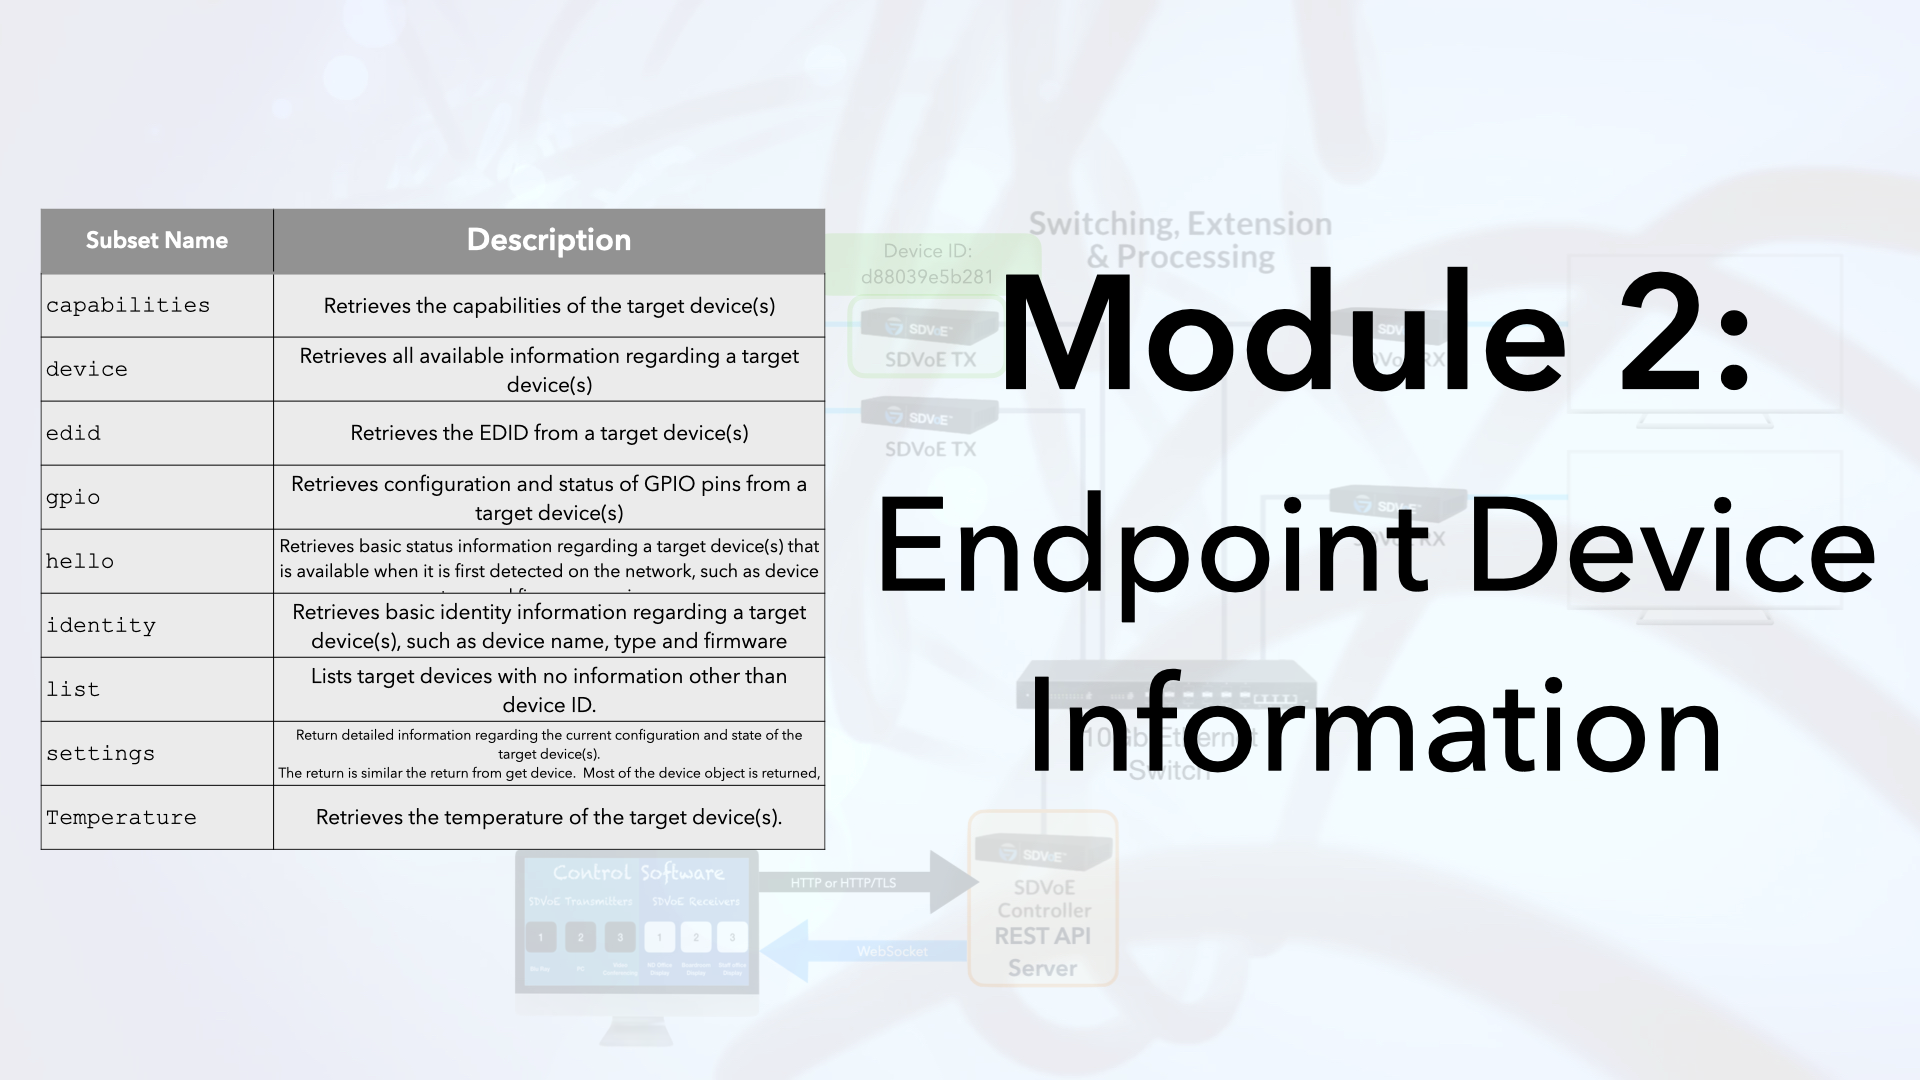 Module 2 - Endpoint Device Information